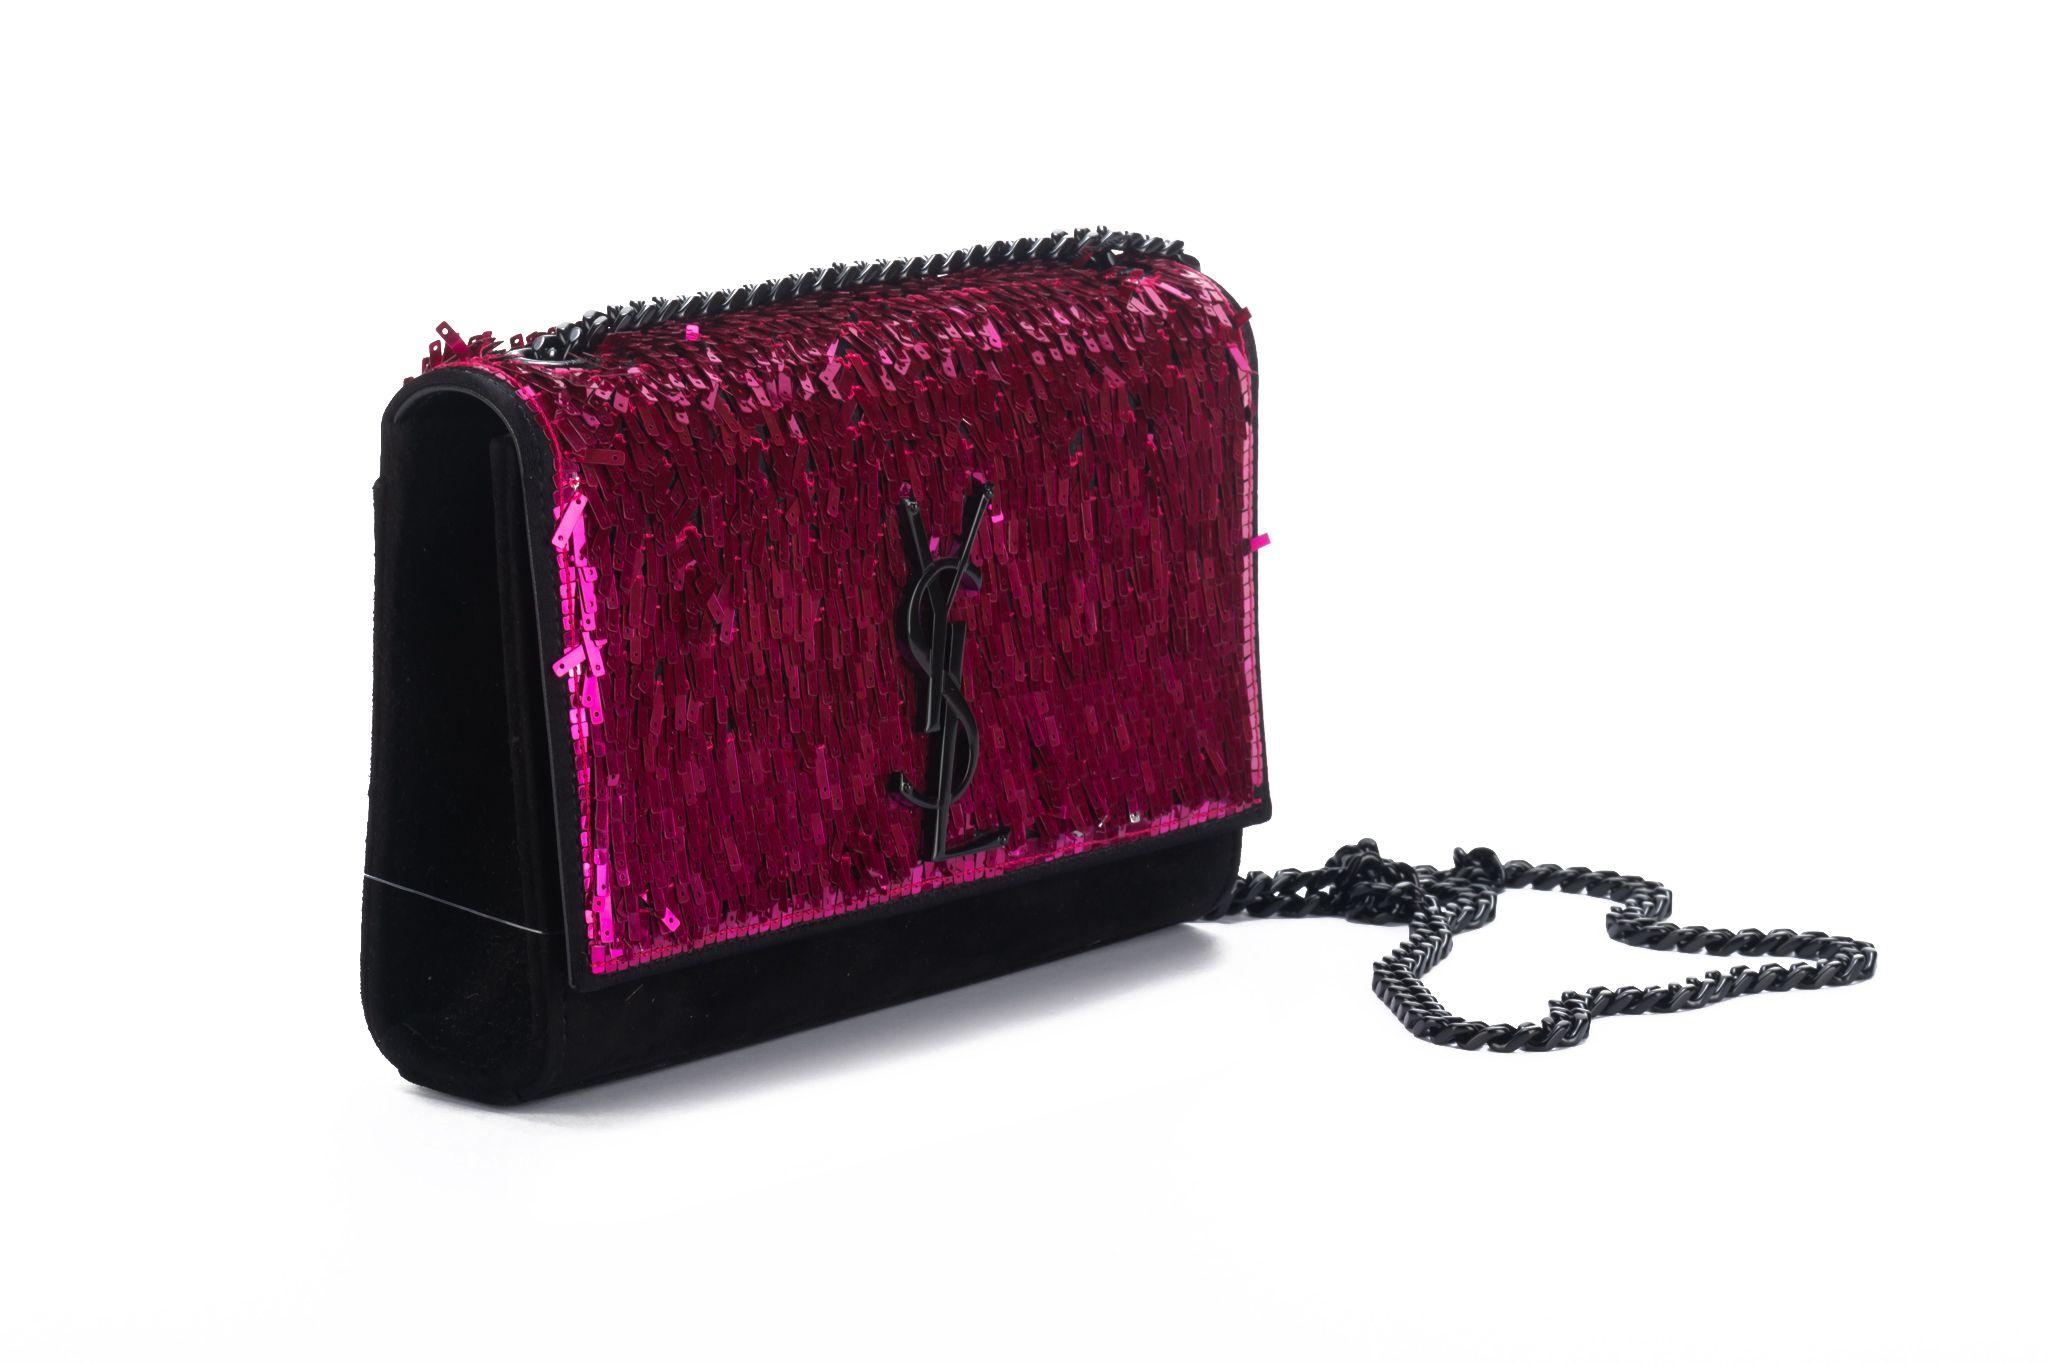 Yves Saint Laurent brand new fuchsia sequins and black suede cross body evening bag. Shoulder drop 22”. Original price 3480$. Comes with booklet and original dust cover.
